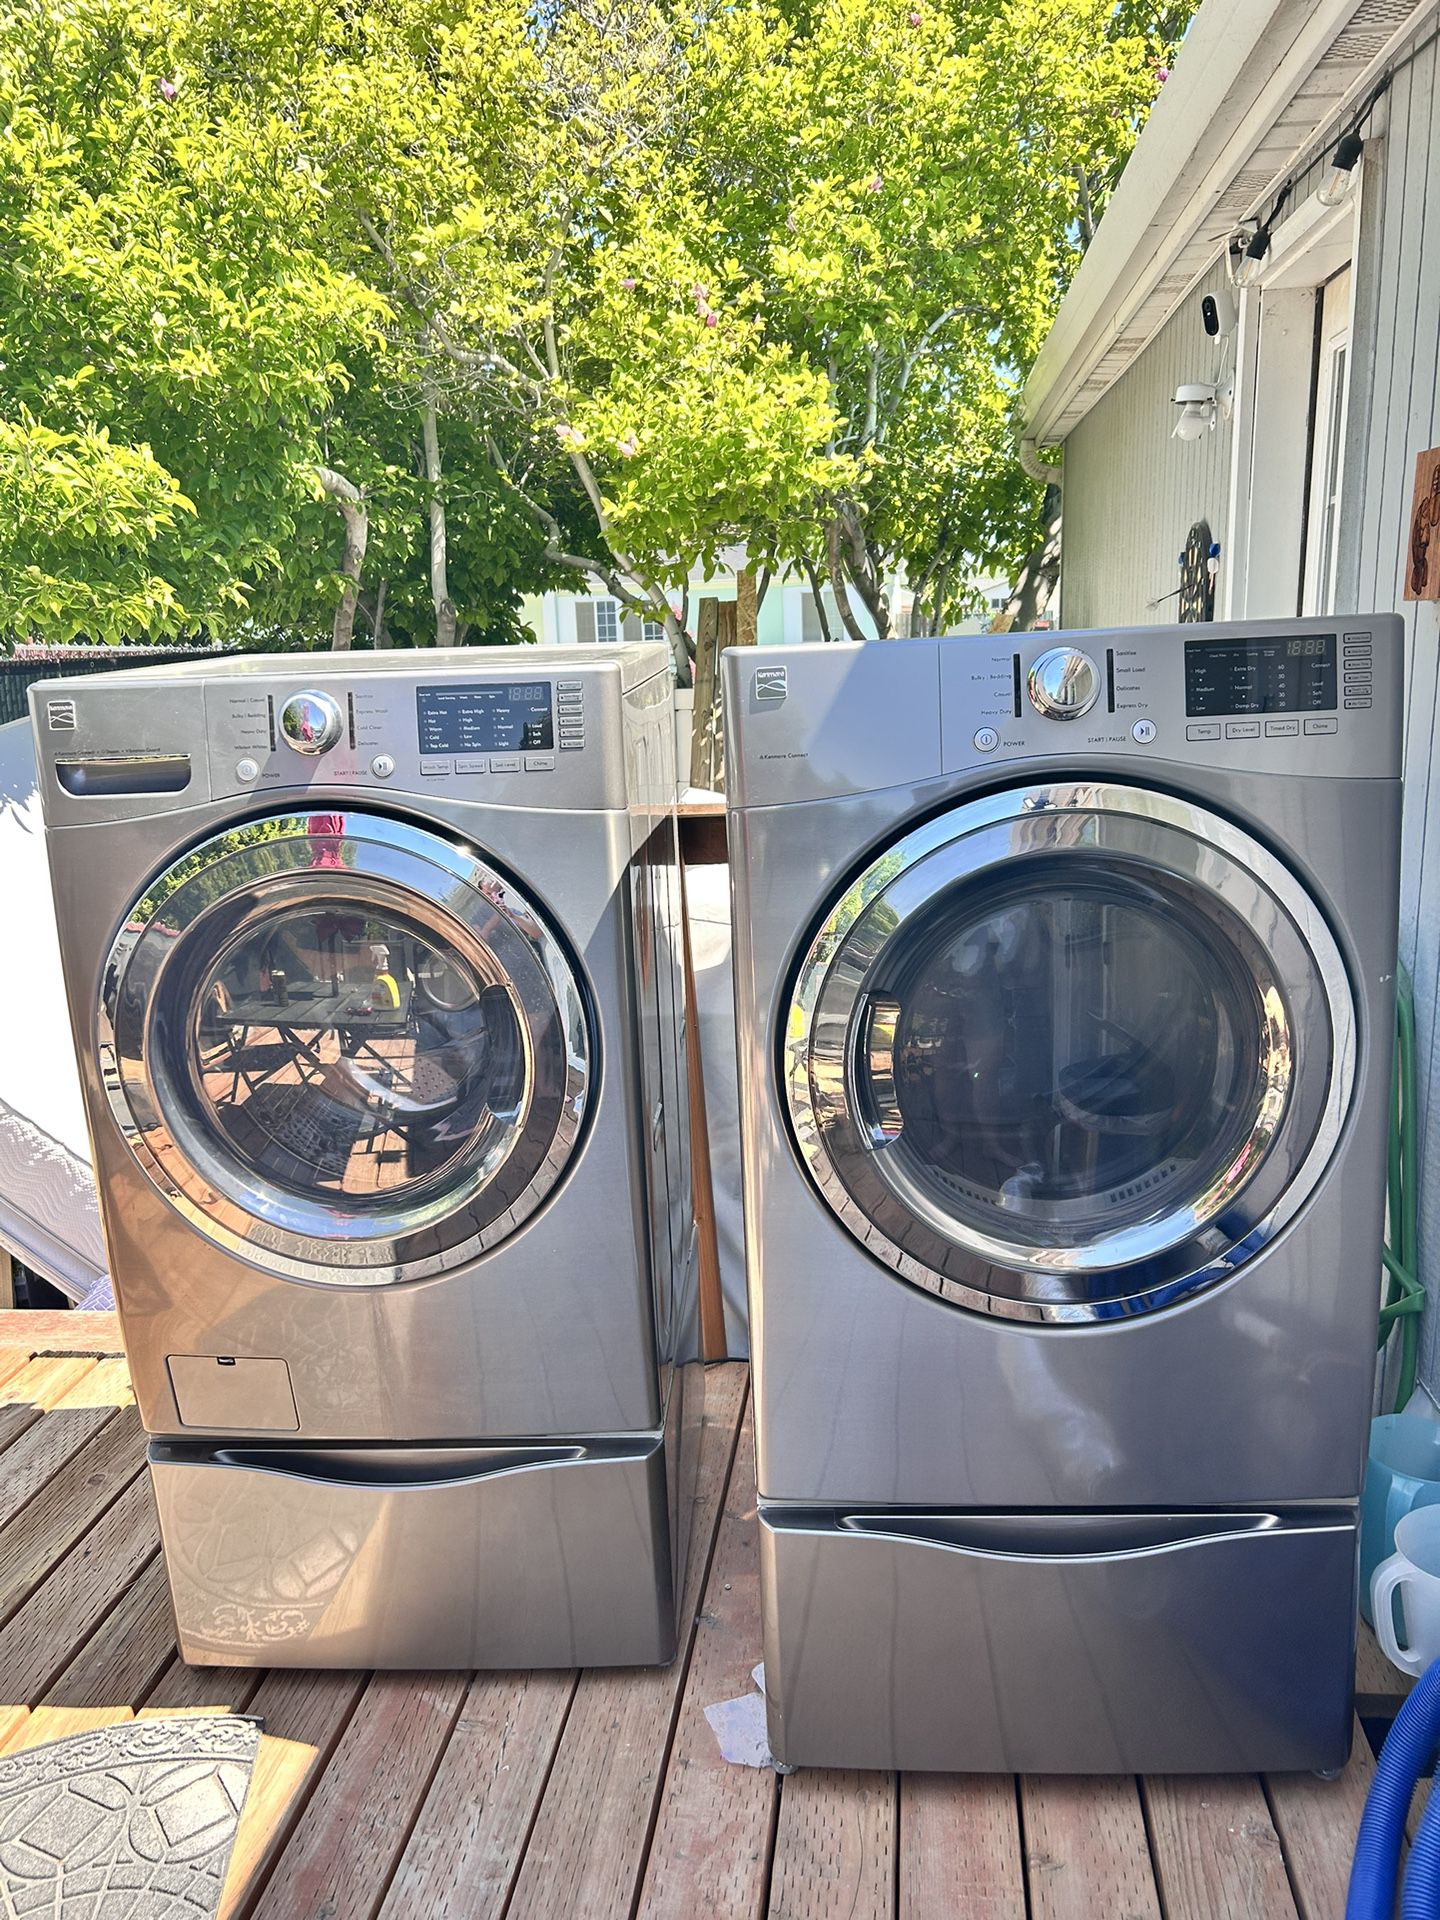 Kenmore Washer And Dryer With Stands And Storage